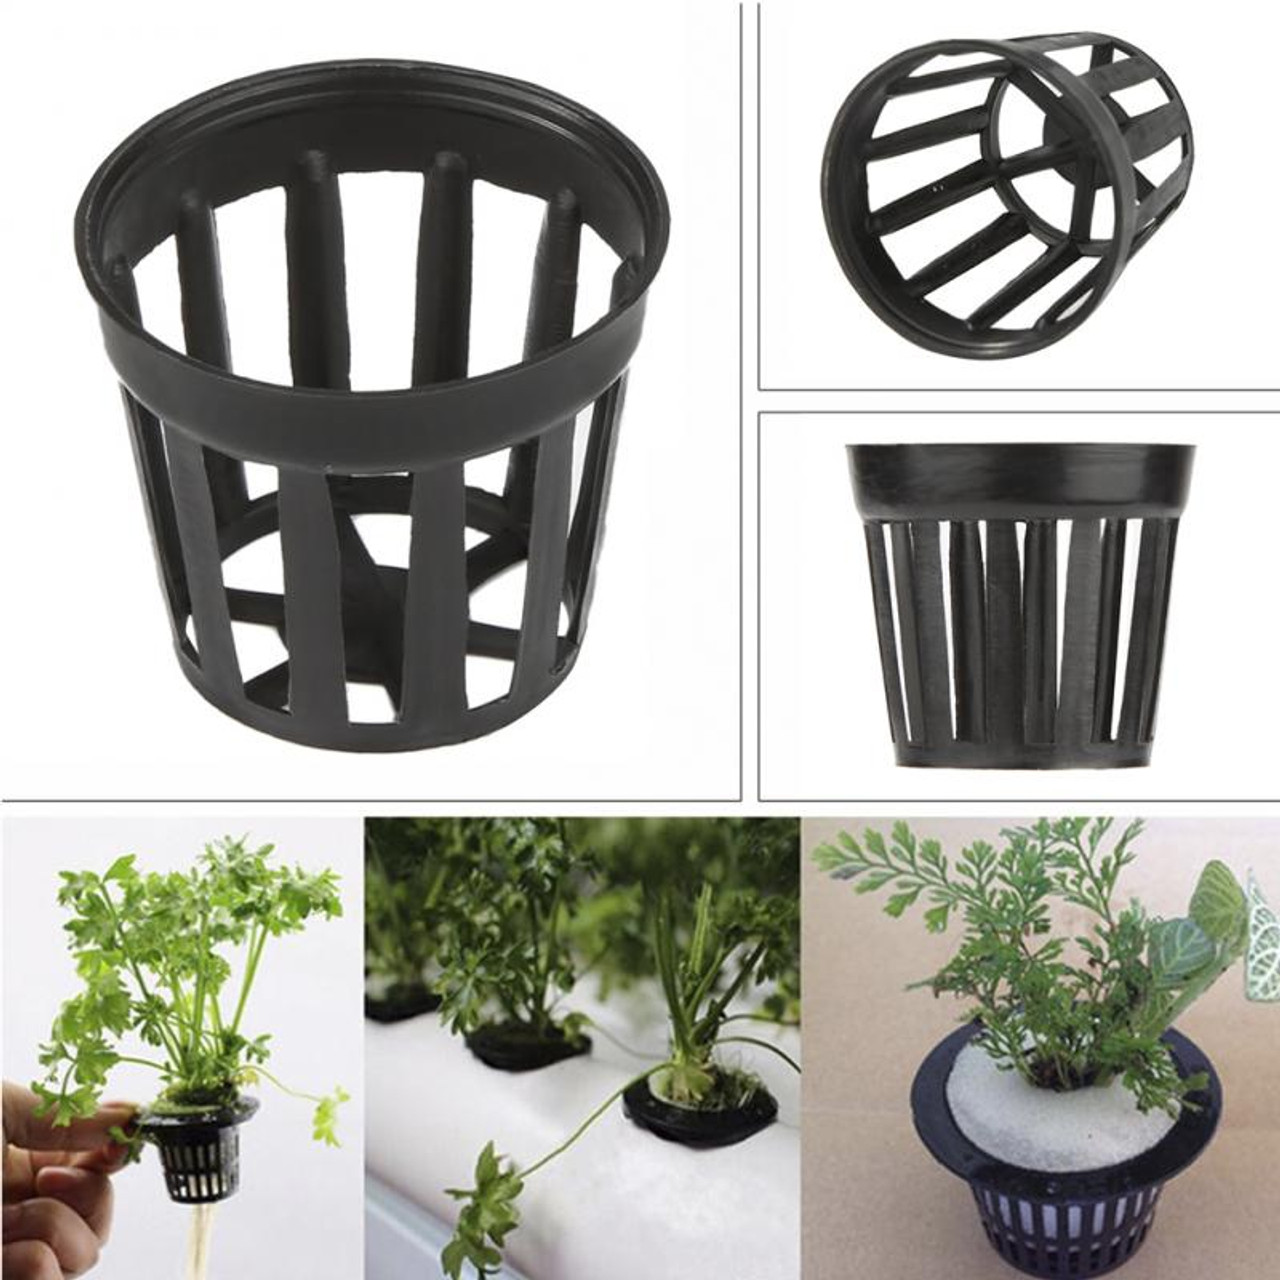 10 x Hydroponic Pots available in 2 sizes Buy in bulk and save! 